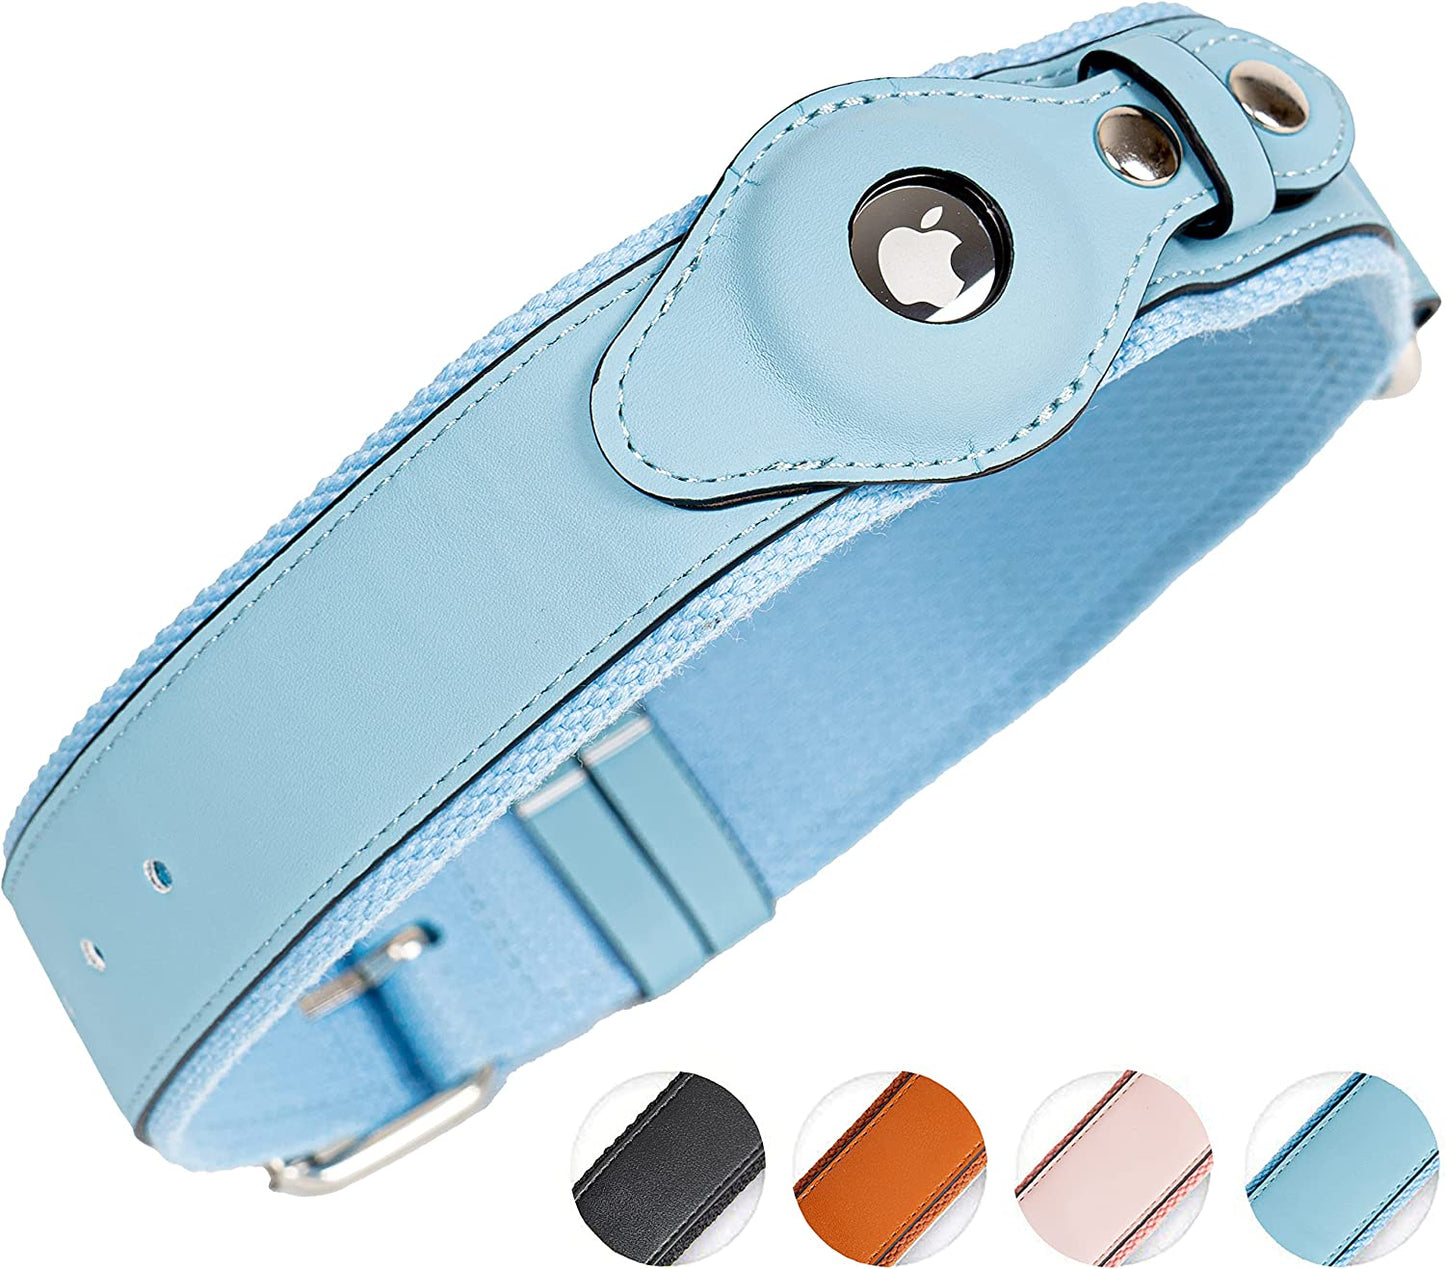 Safe Paws Airtag Dog Collar Holder - Our Adjustable Air Tag Dog Collar Holder Fits Small Medium and Large Dogs - Use Our Elegant PU Leather Dog Airtag Collar to Quickly Locate Your Dog Electronics > GPS Accessories > GPS Cases Safe Paws Blue Small 